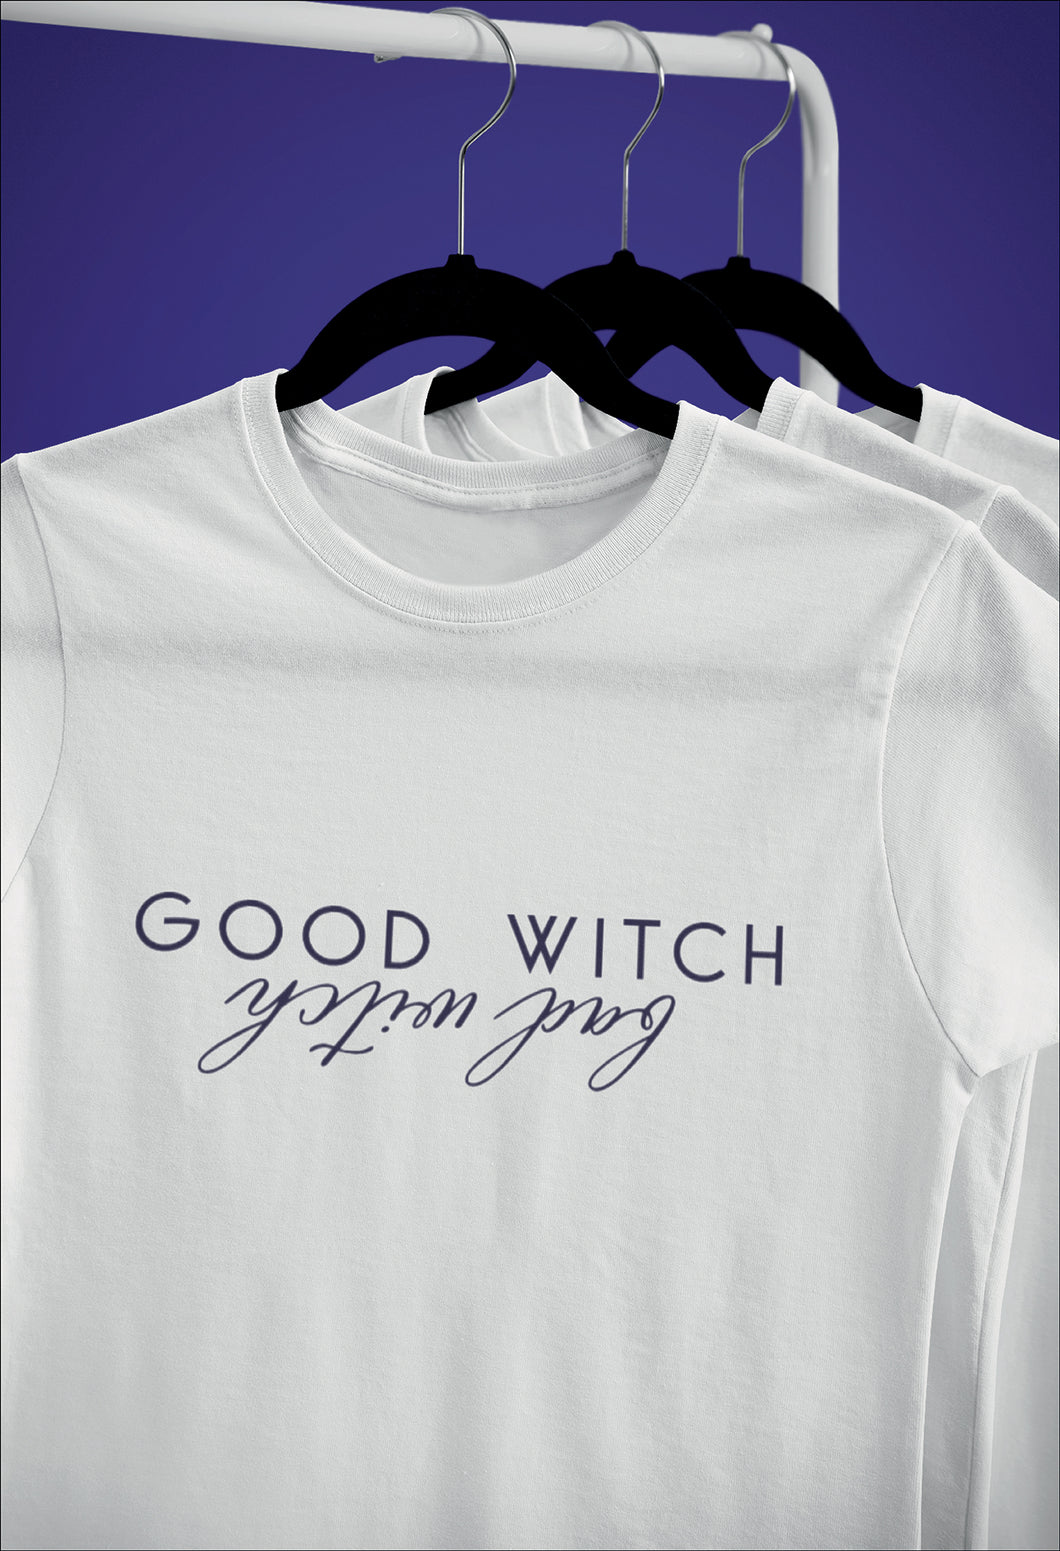 GOOD WITCH BAD WITCH Tee